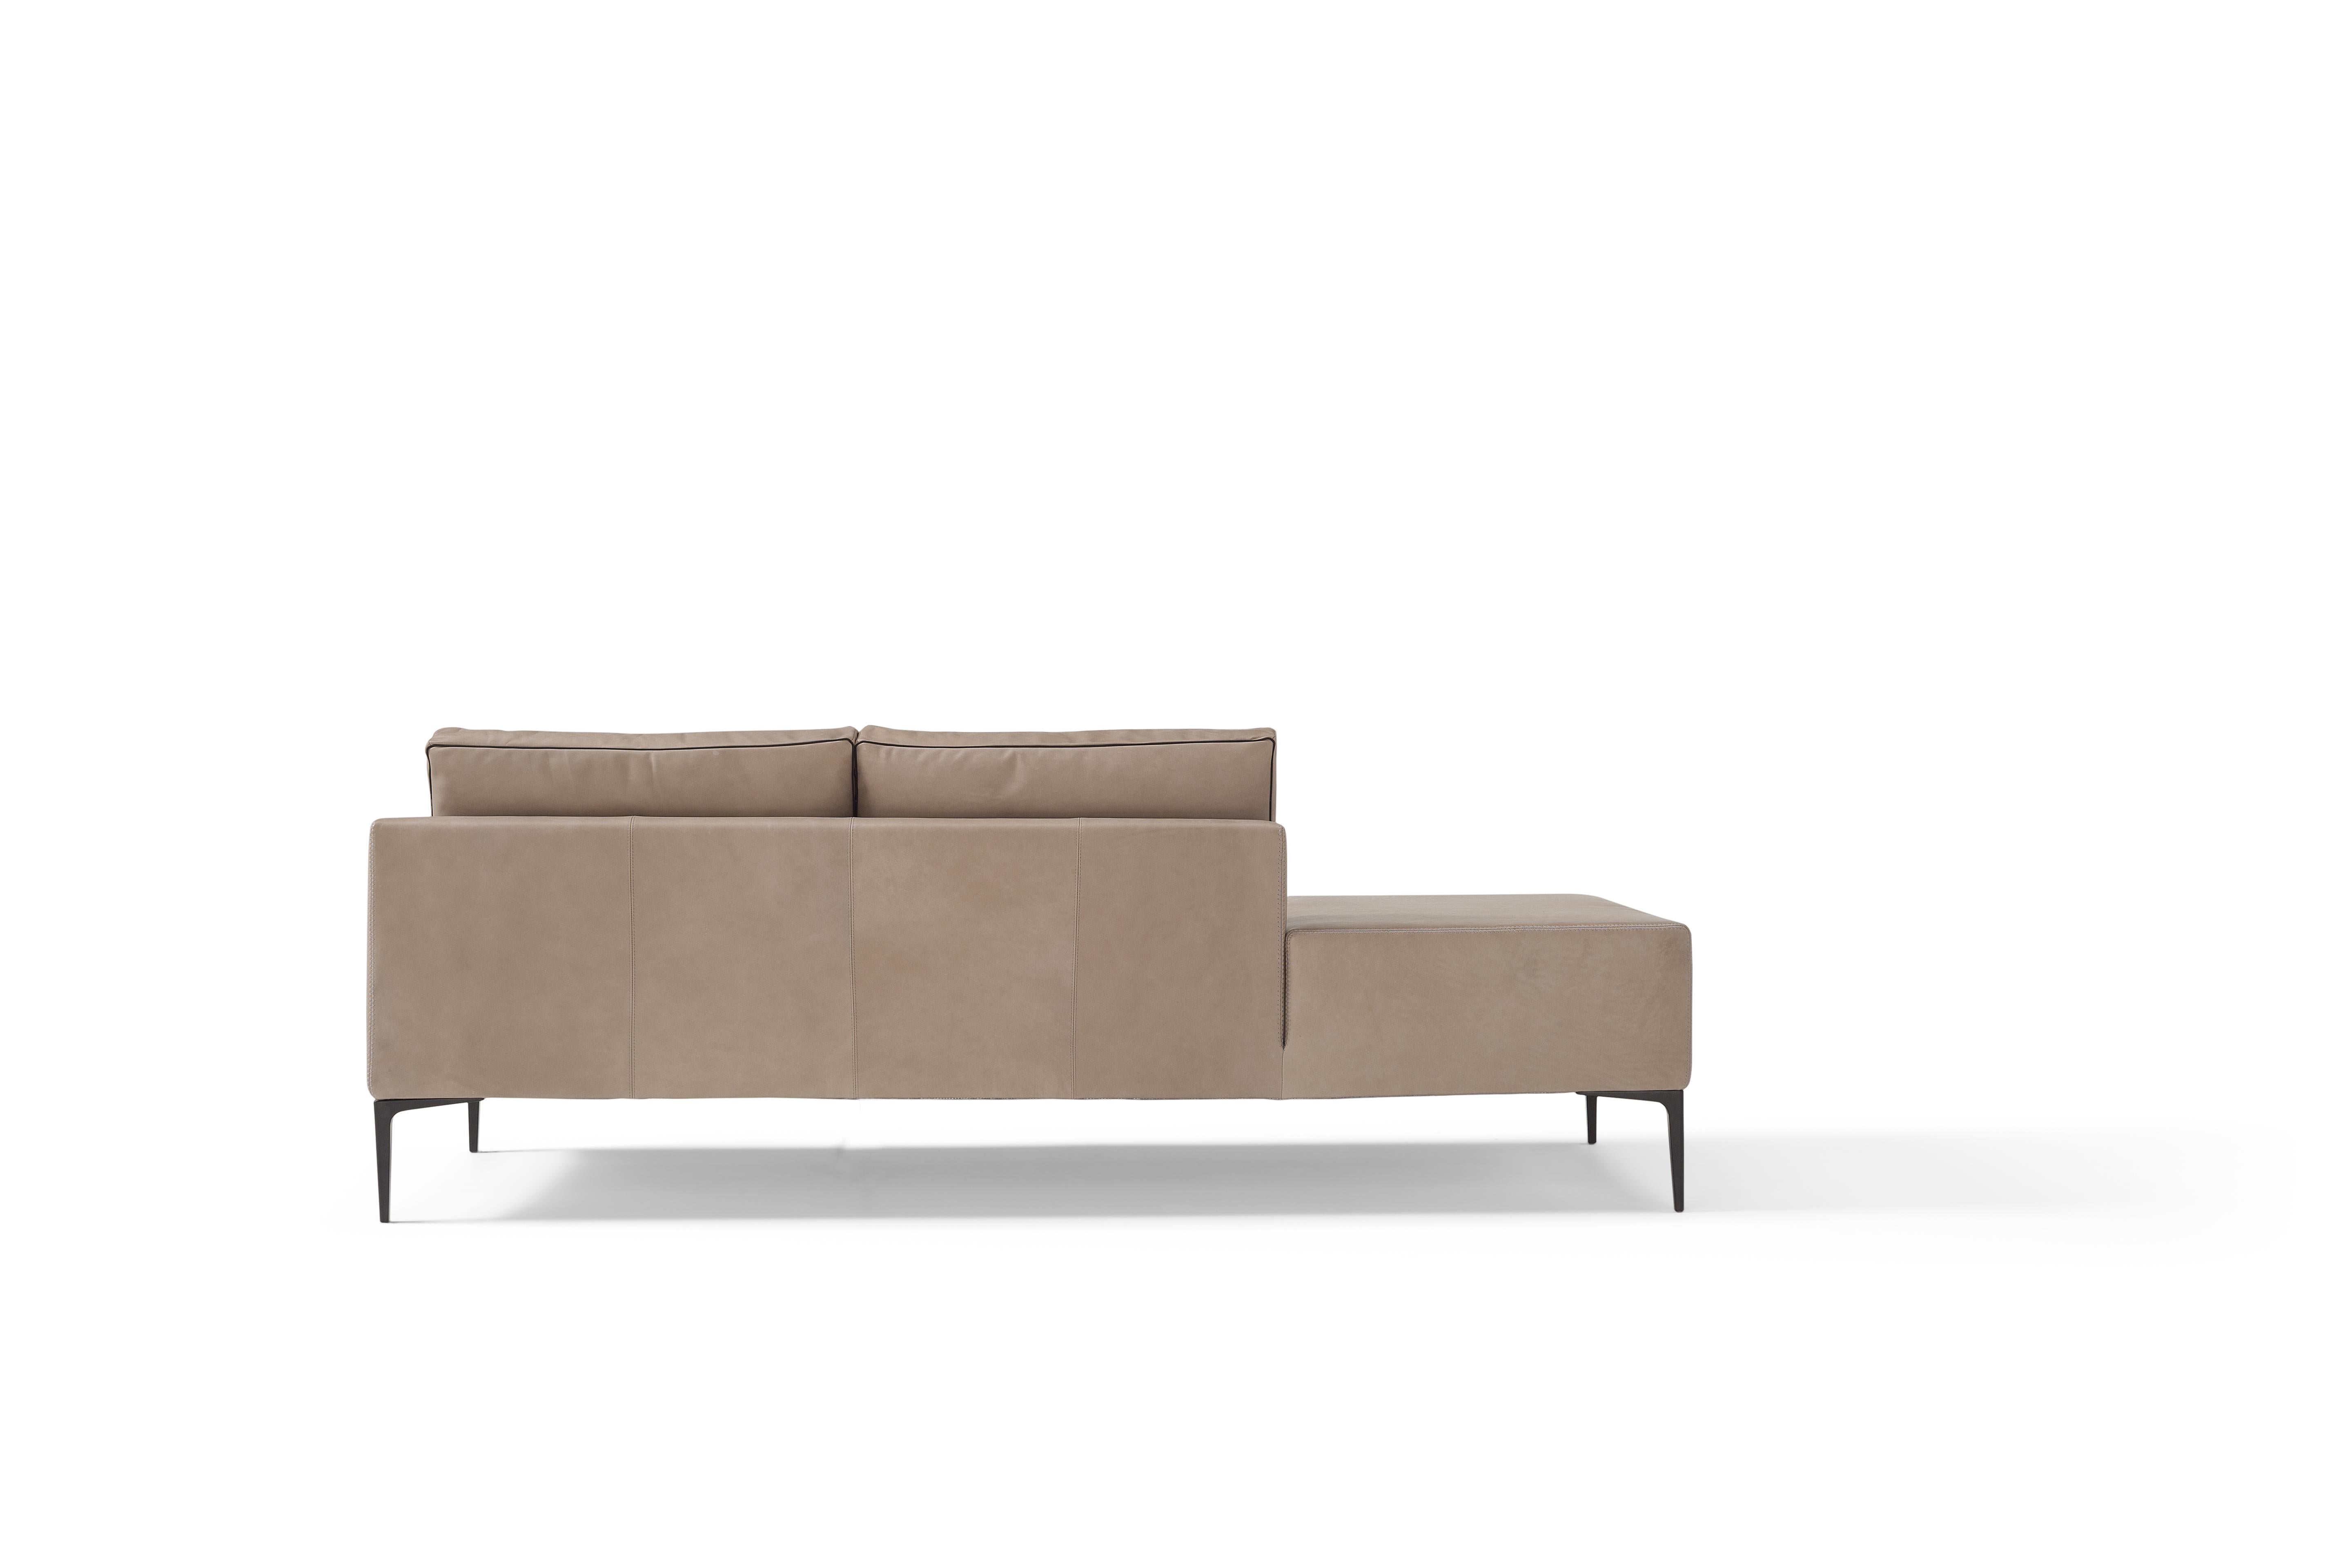 Italian Amura 'Elsa' Sofa in Taupe Leather with Connected Table by Luca Scachetti For Sale